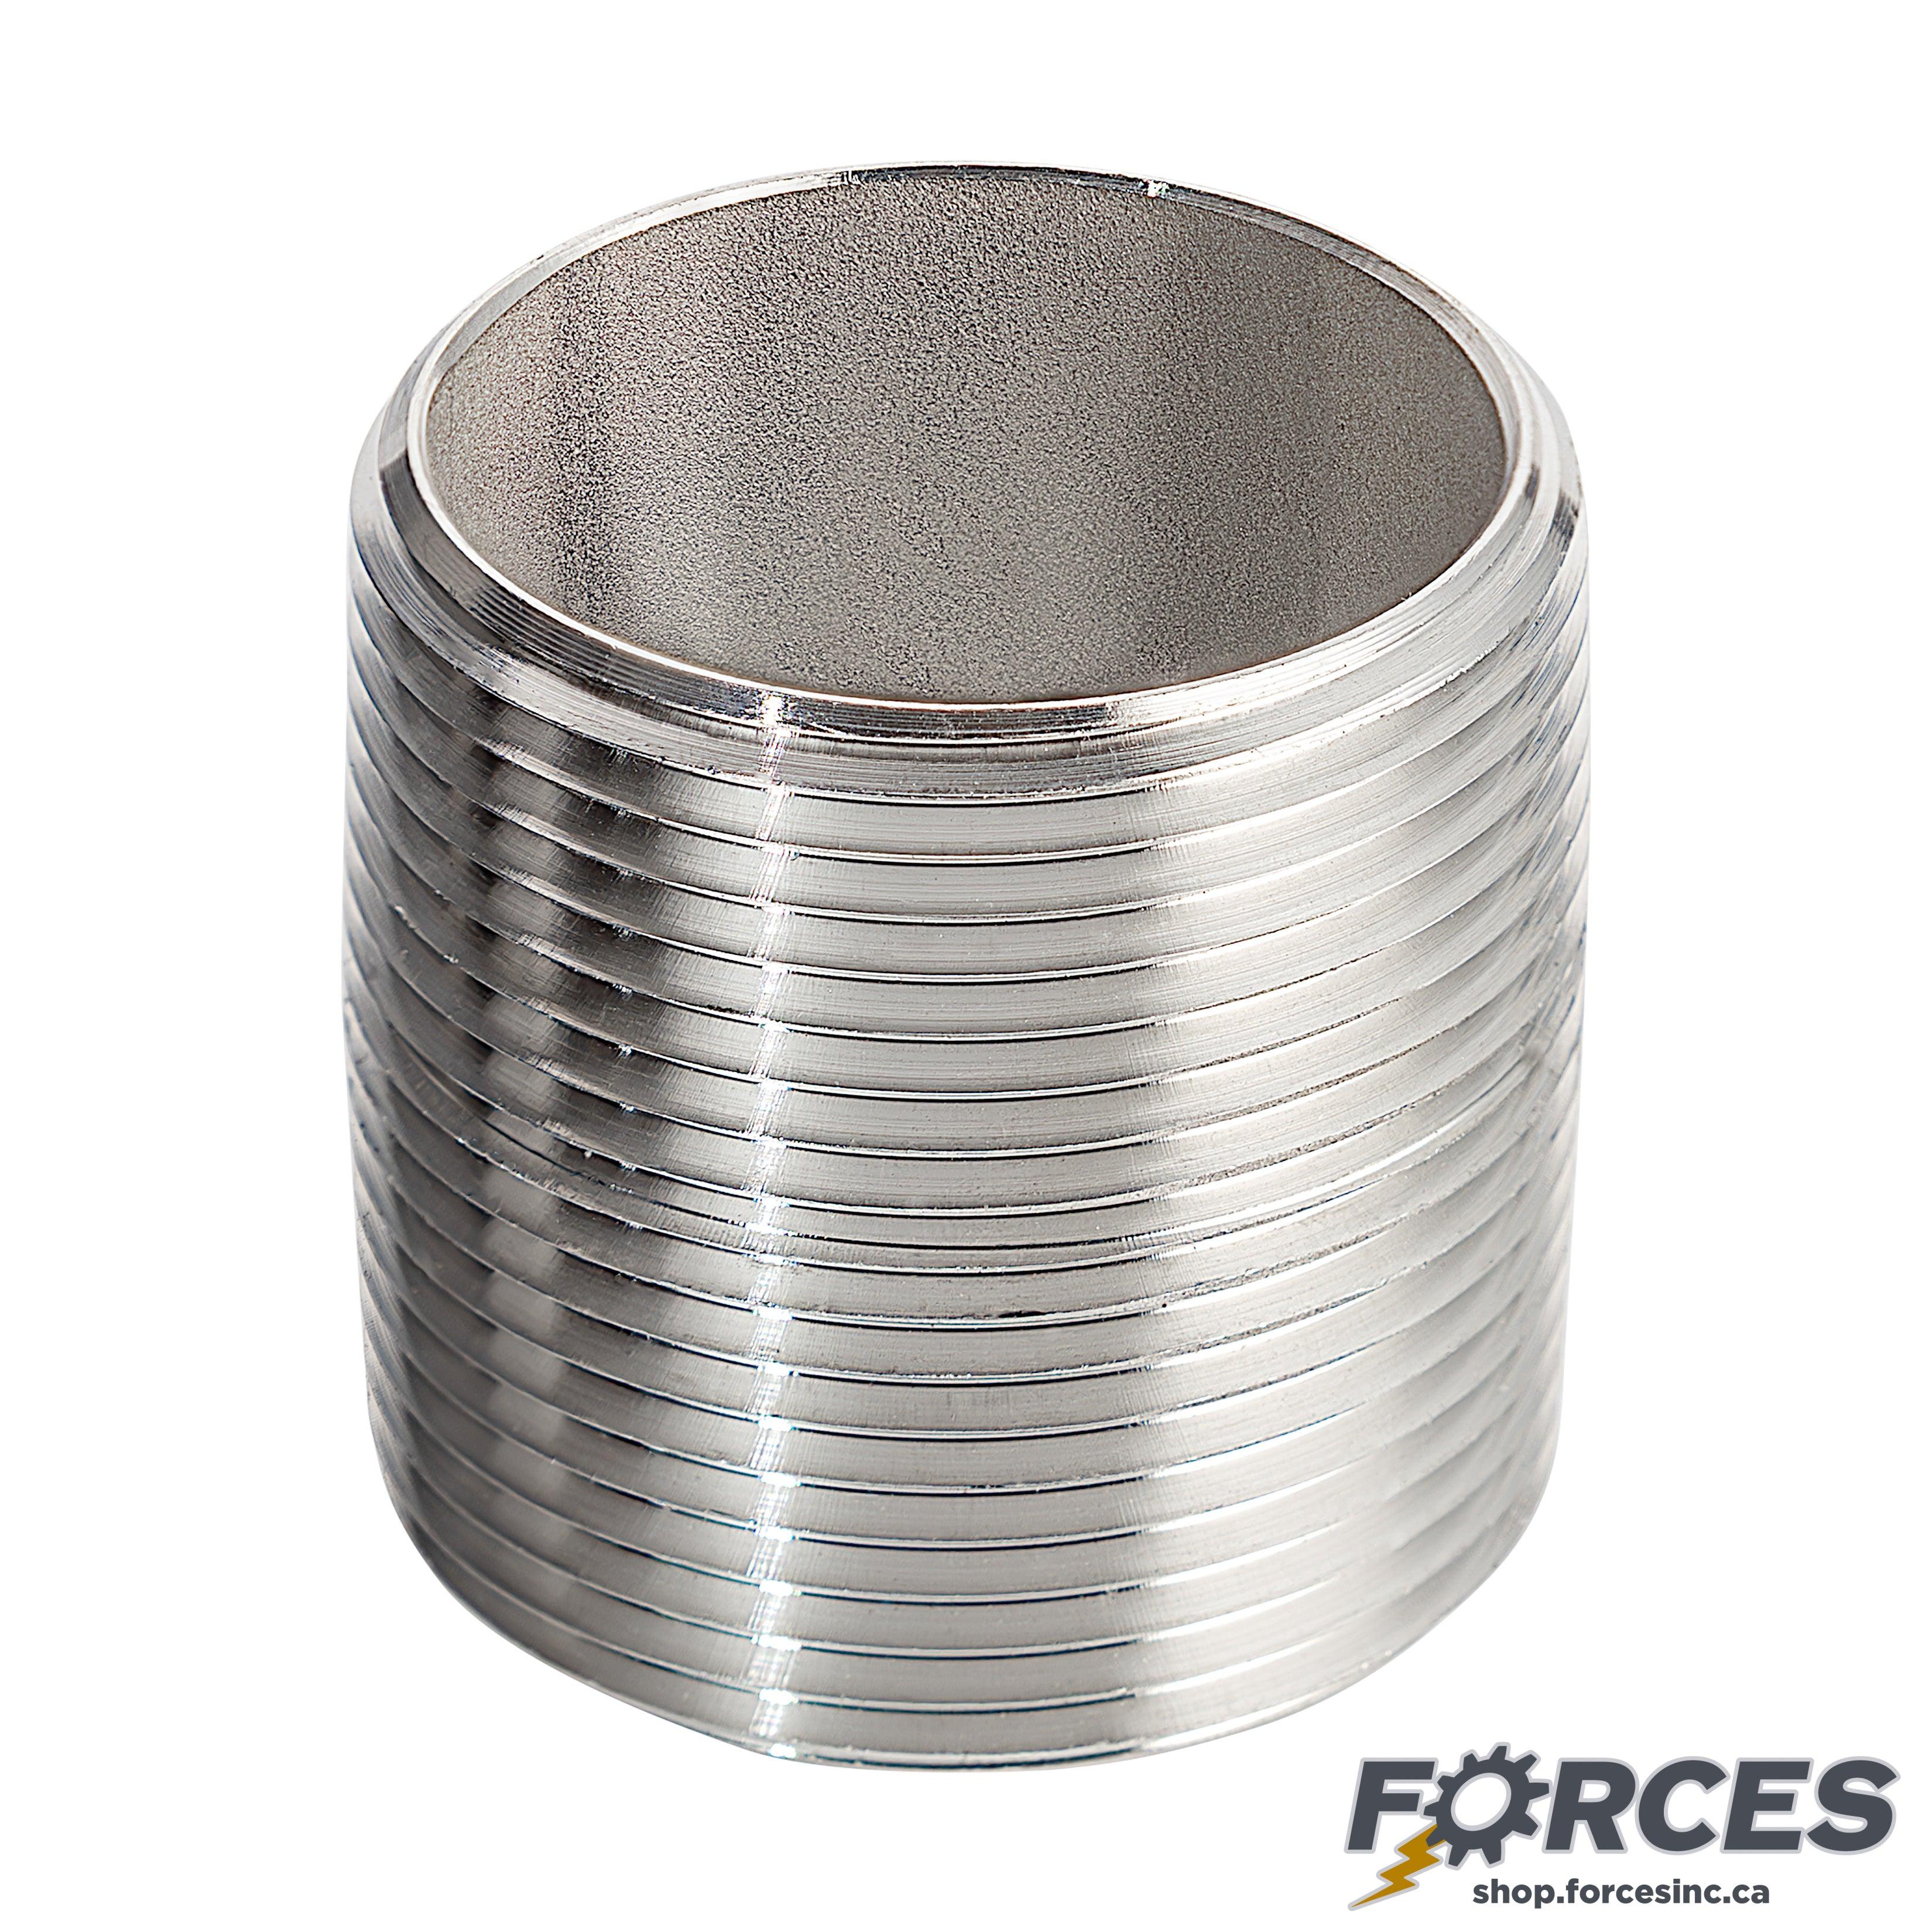 2" Closed Nipple - Stainless Steel 316 - Forces Inc